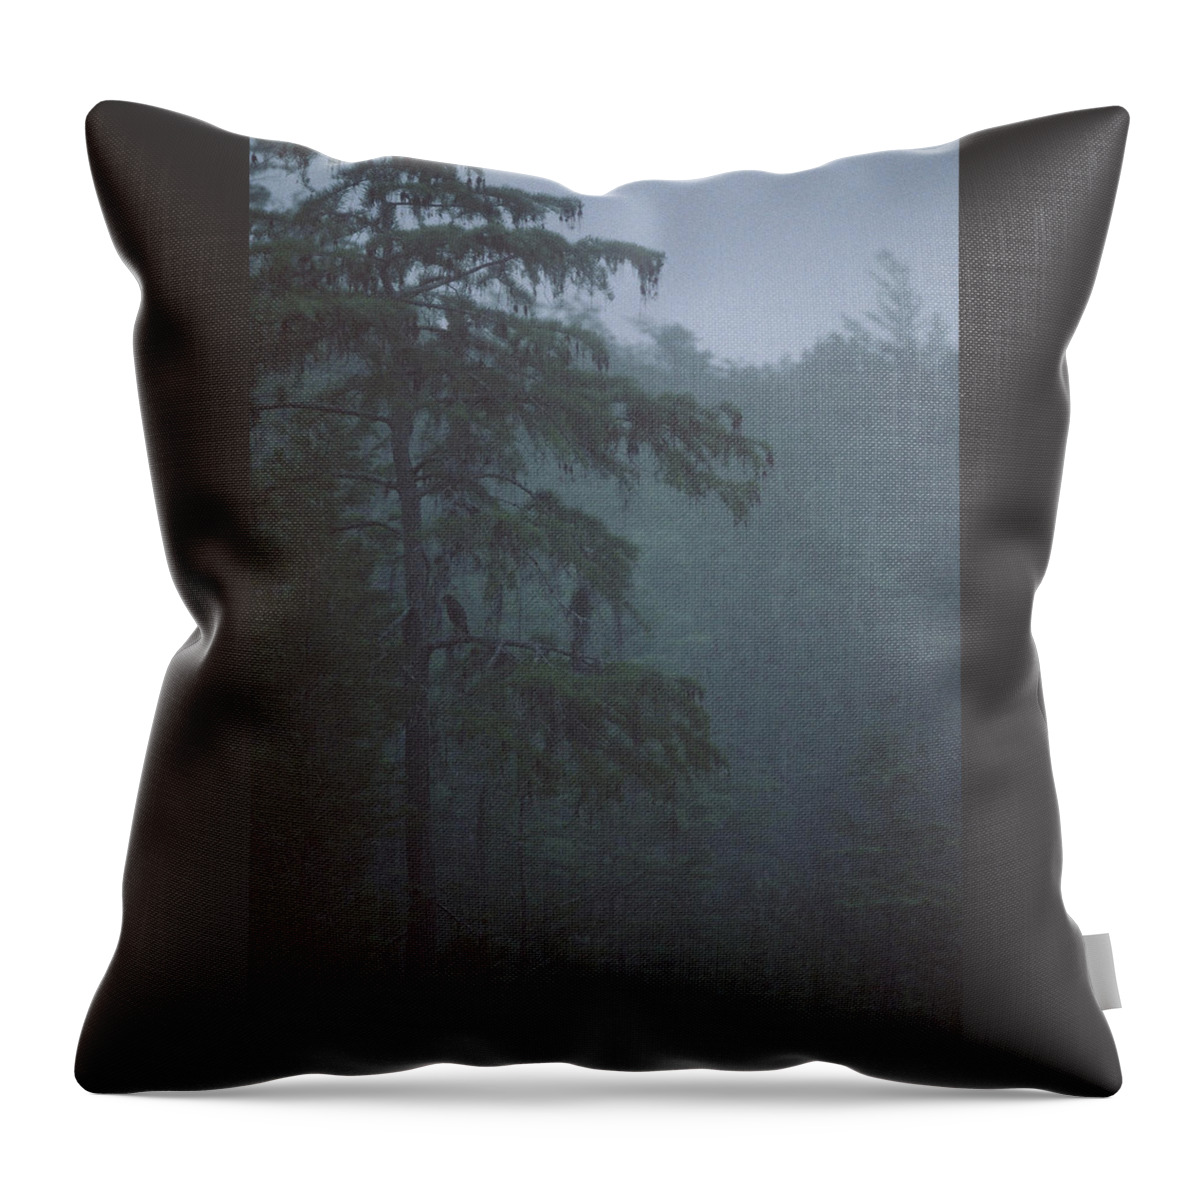 Cypress Throw Pillow featuring the photograph Cypress Swamp by Kimberly Mohlenhoff